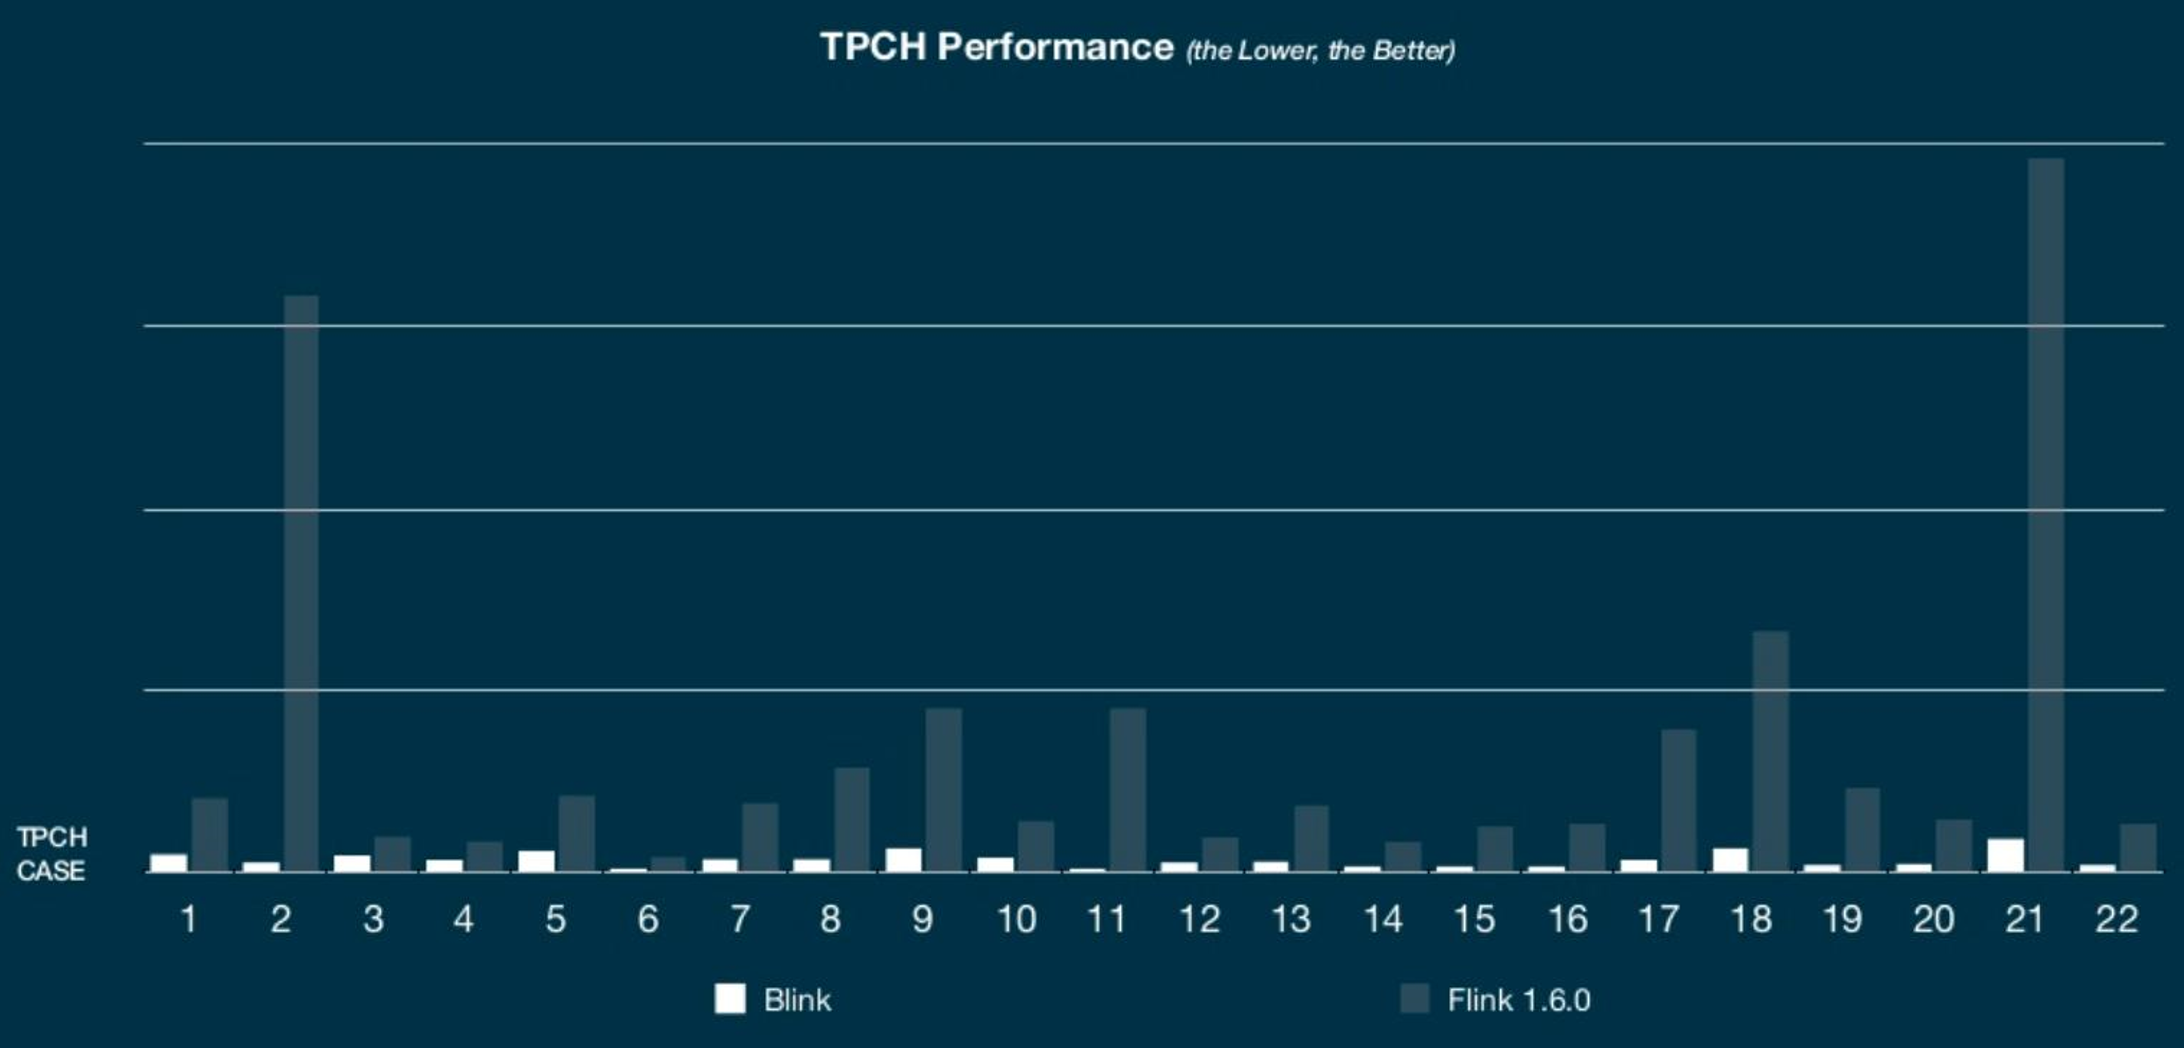 TPC-H performance of Blink and Flink.